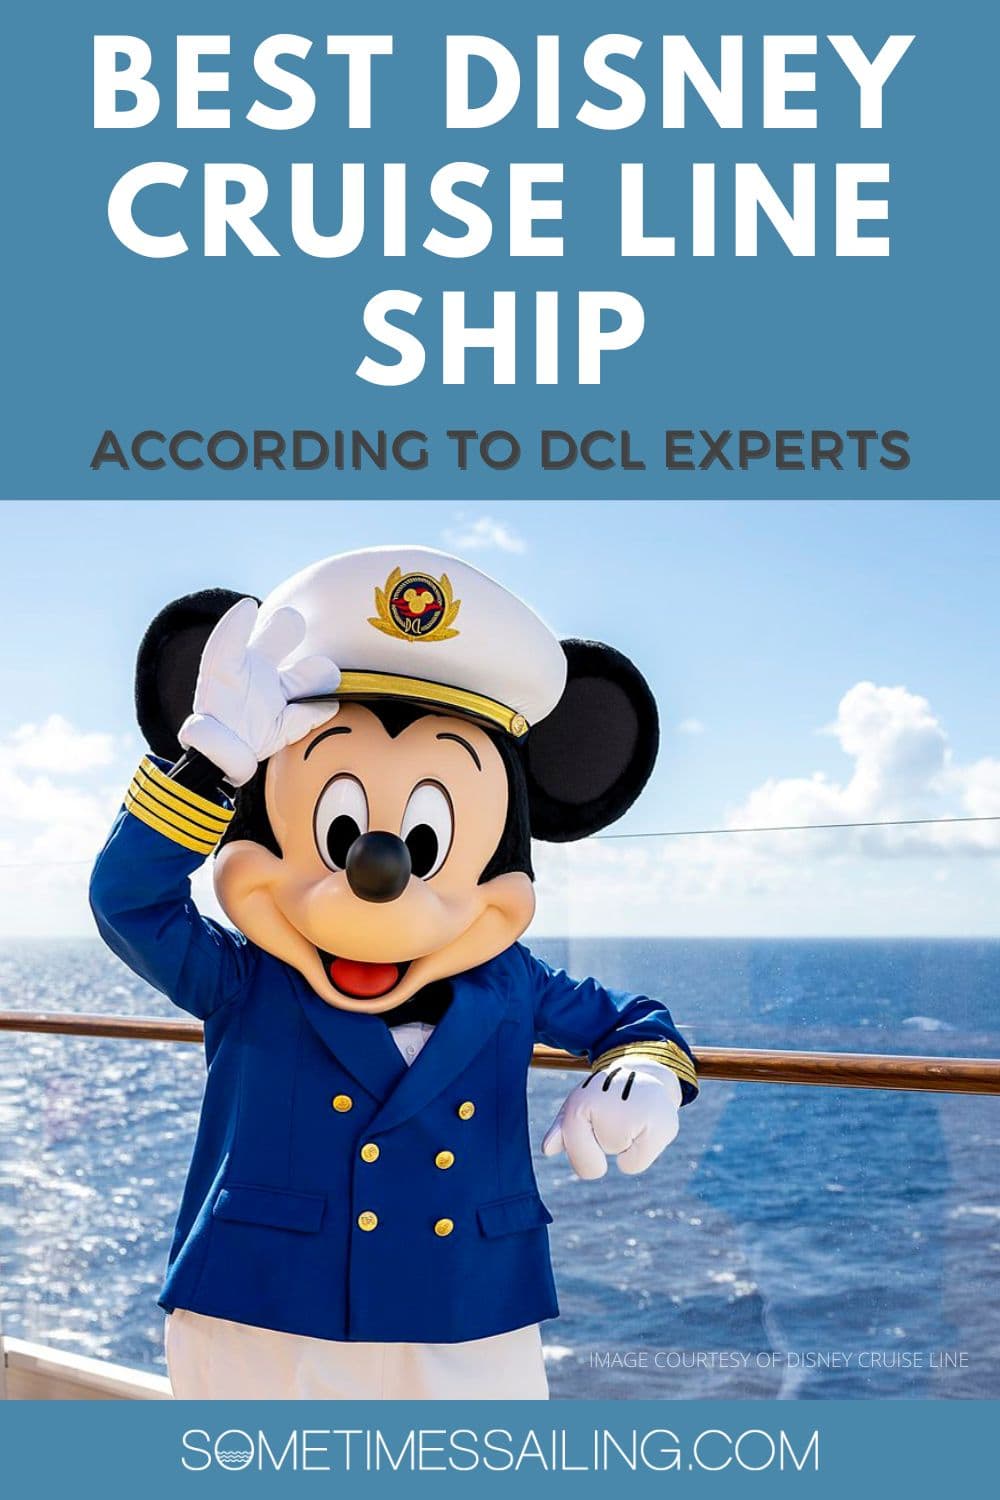 Best Disney Cruise Line Ship according to DCL experts with an image Captain Mickey Mouse near a ship balcony with the ocean behind him.